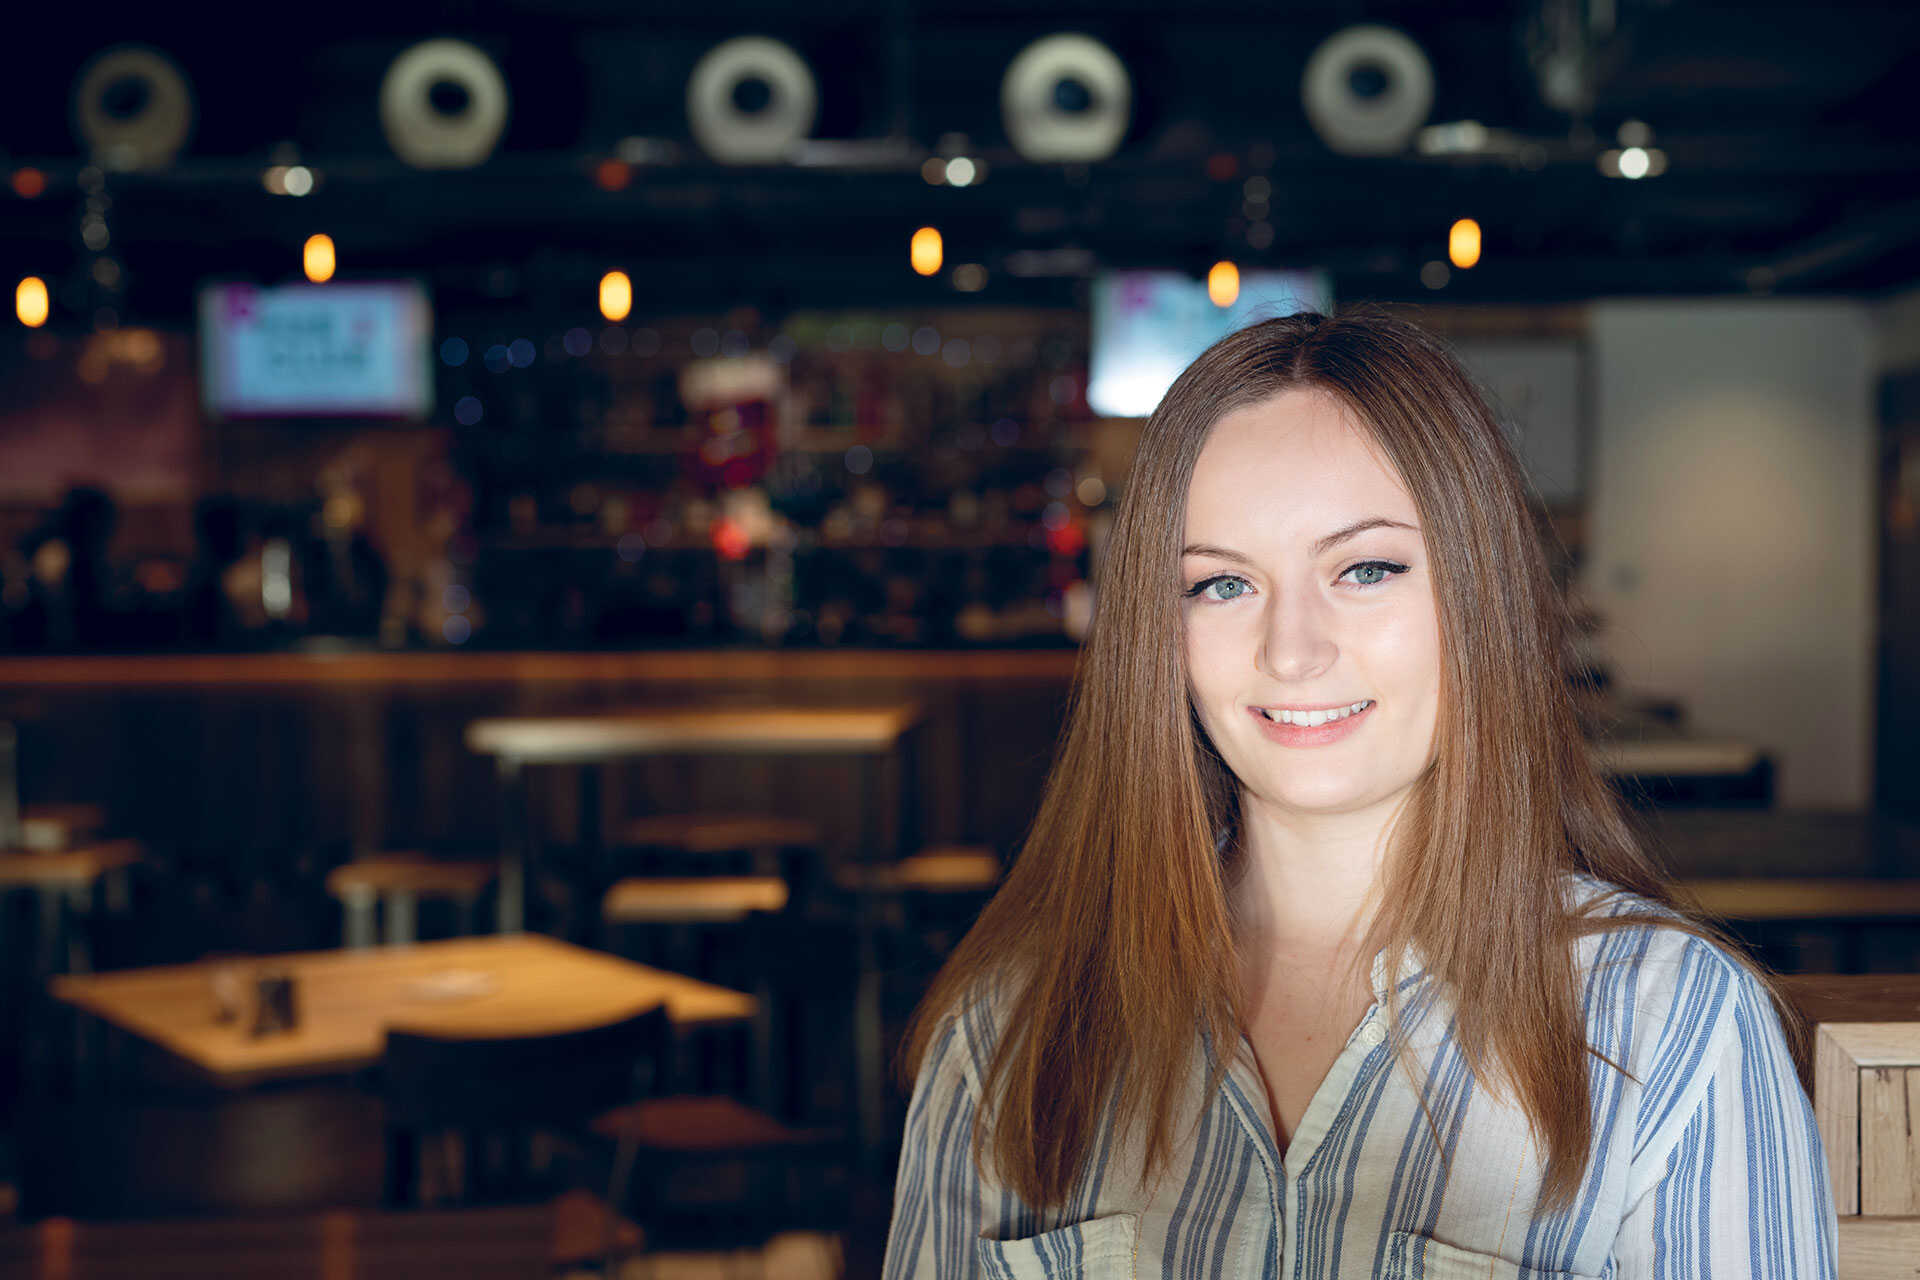 Female student sitting at a table in a bar